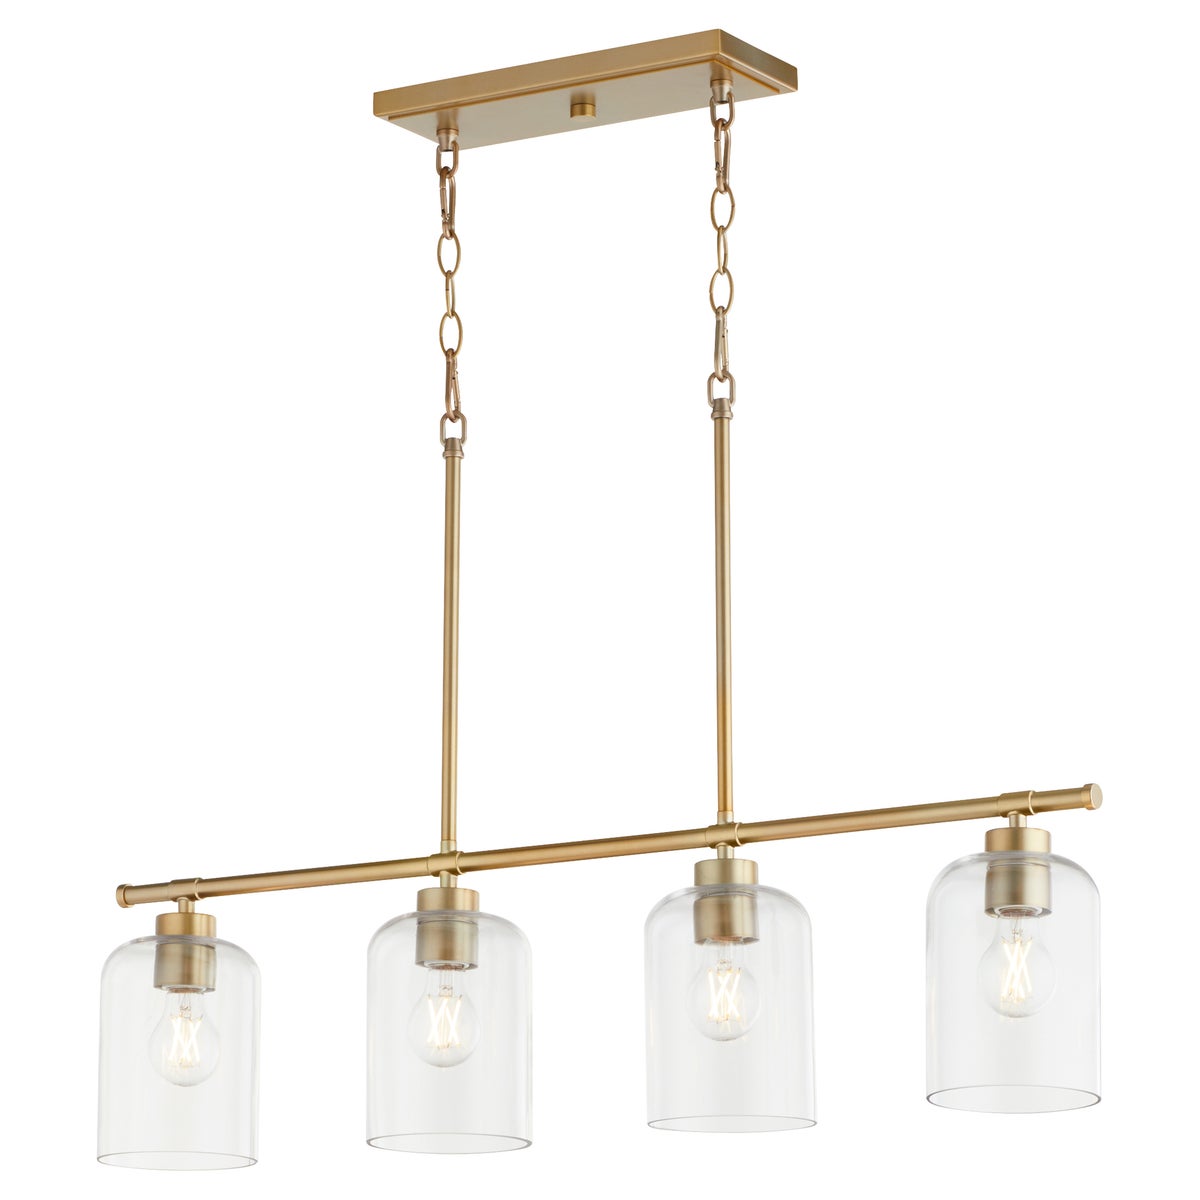 Kitchen Pendant Light with clear glass shades on linear frames. Choose from matte black, aged brass, or satin nickel finishes. Indoor/outdoor use. 100W, 4 bulbs, dimmable. UL Listed, Damp Location. 2-year warranty. 5"W x 9.5"H x 35"L.